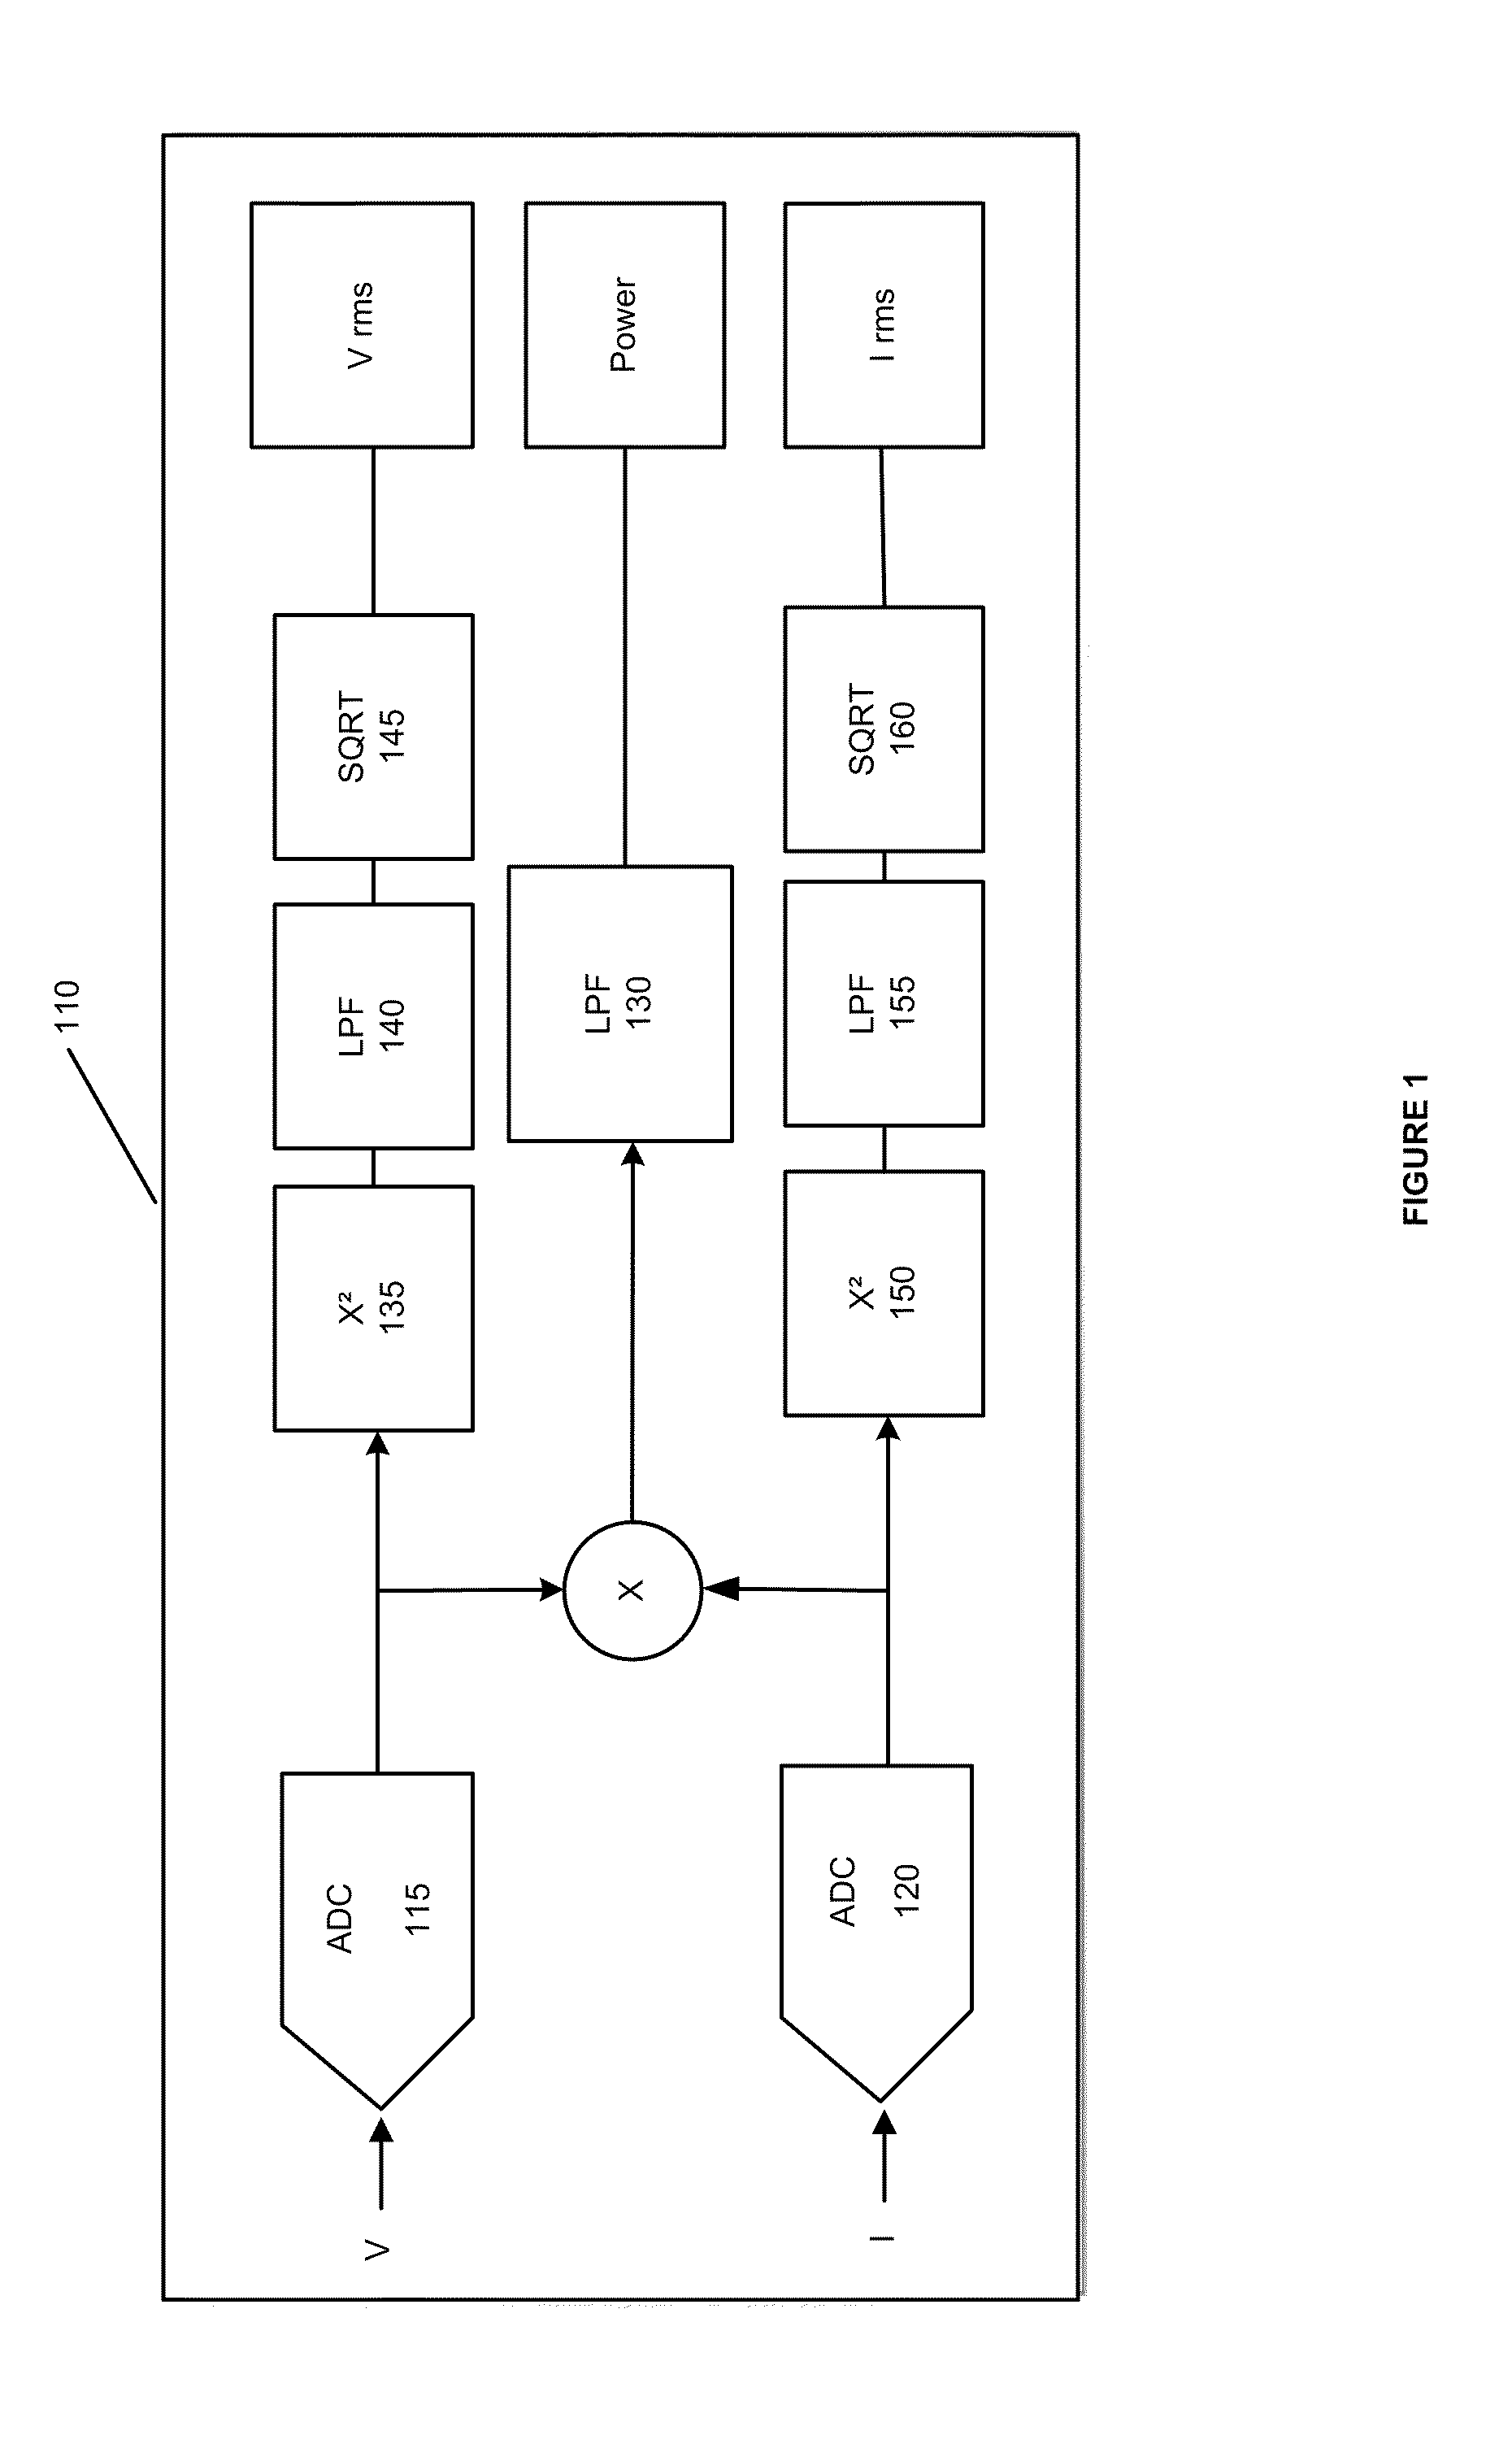 Root mean square (RMS) metering devices and methods for generating RMS current level to both high or low frequency within signal